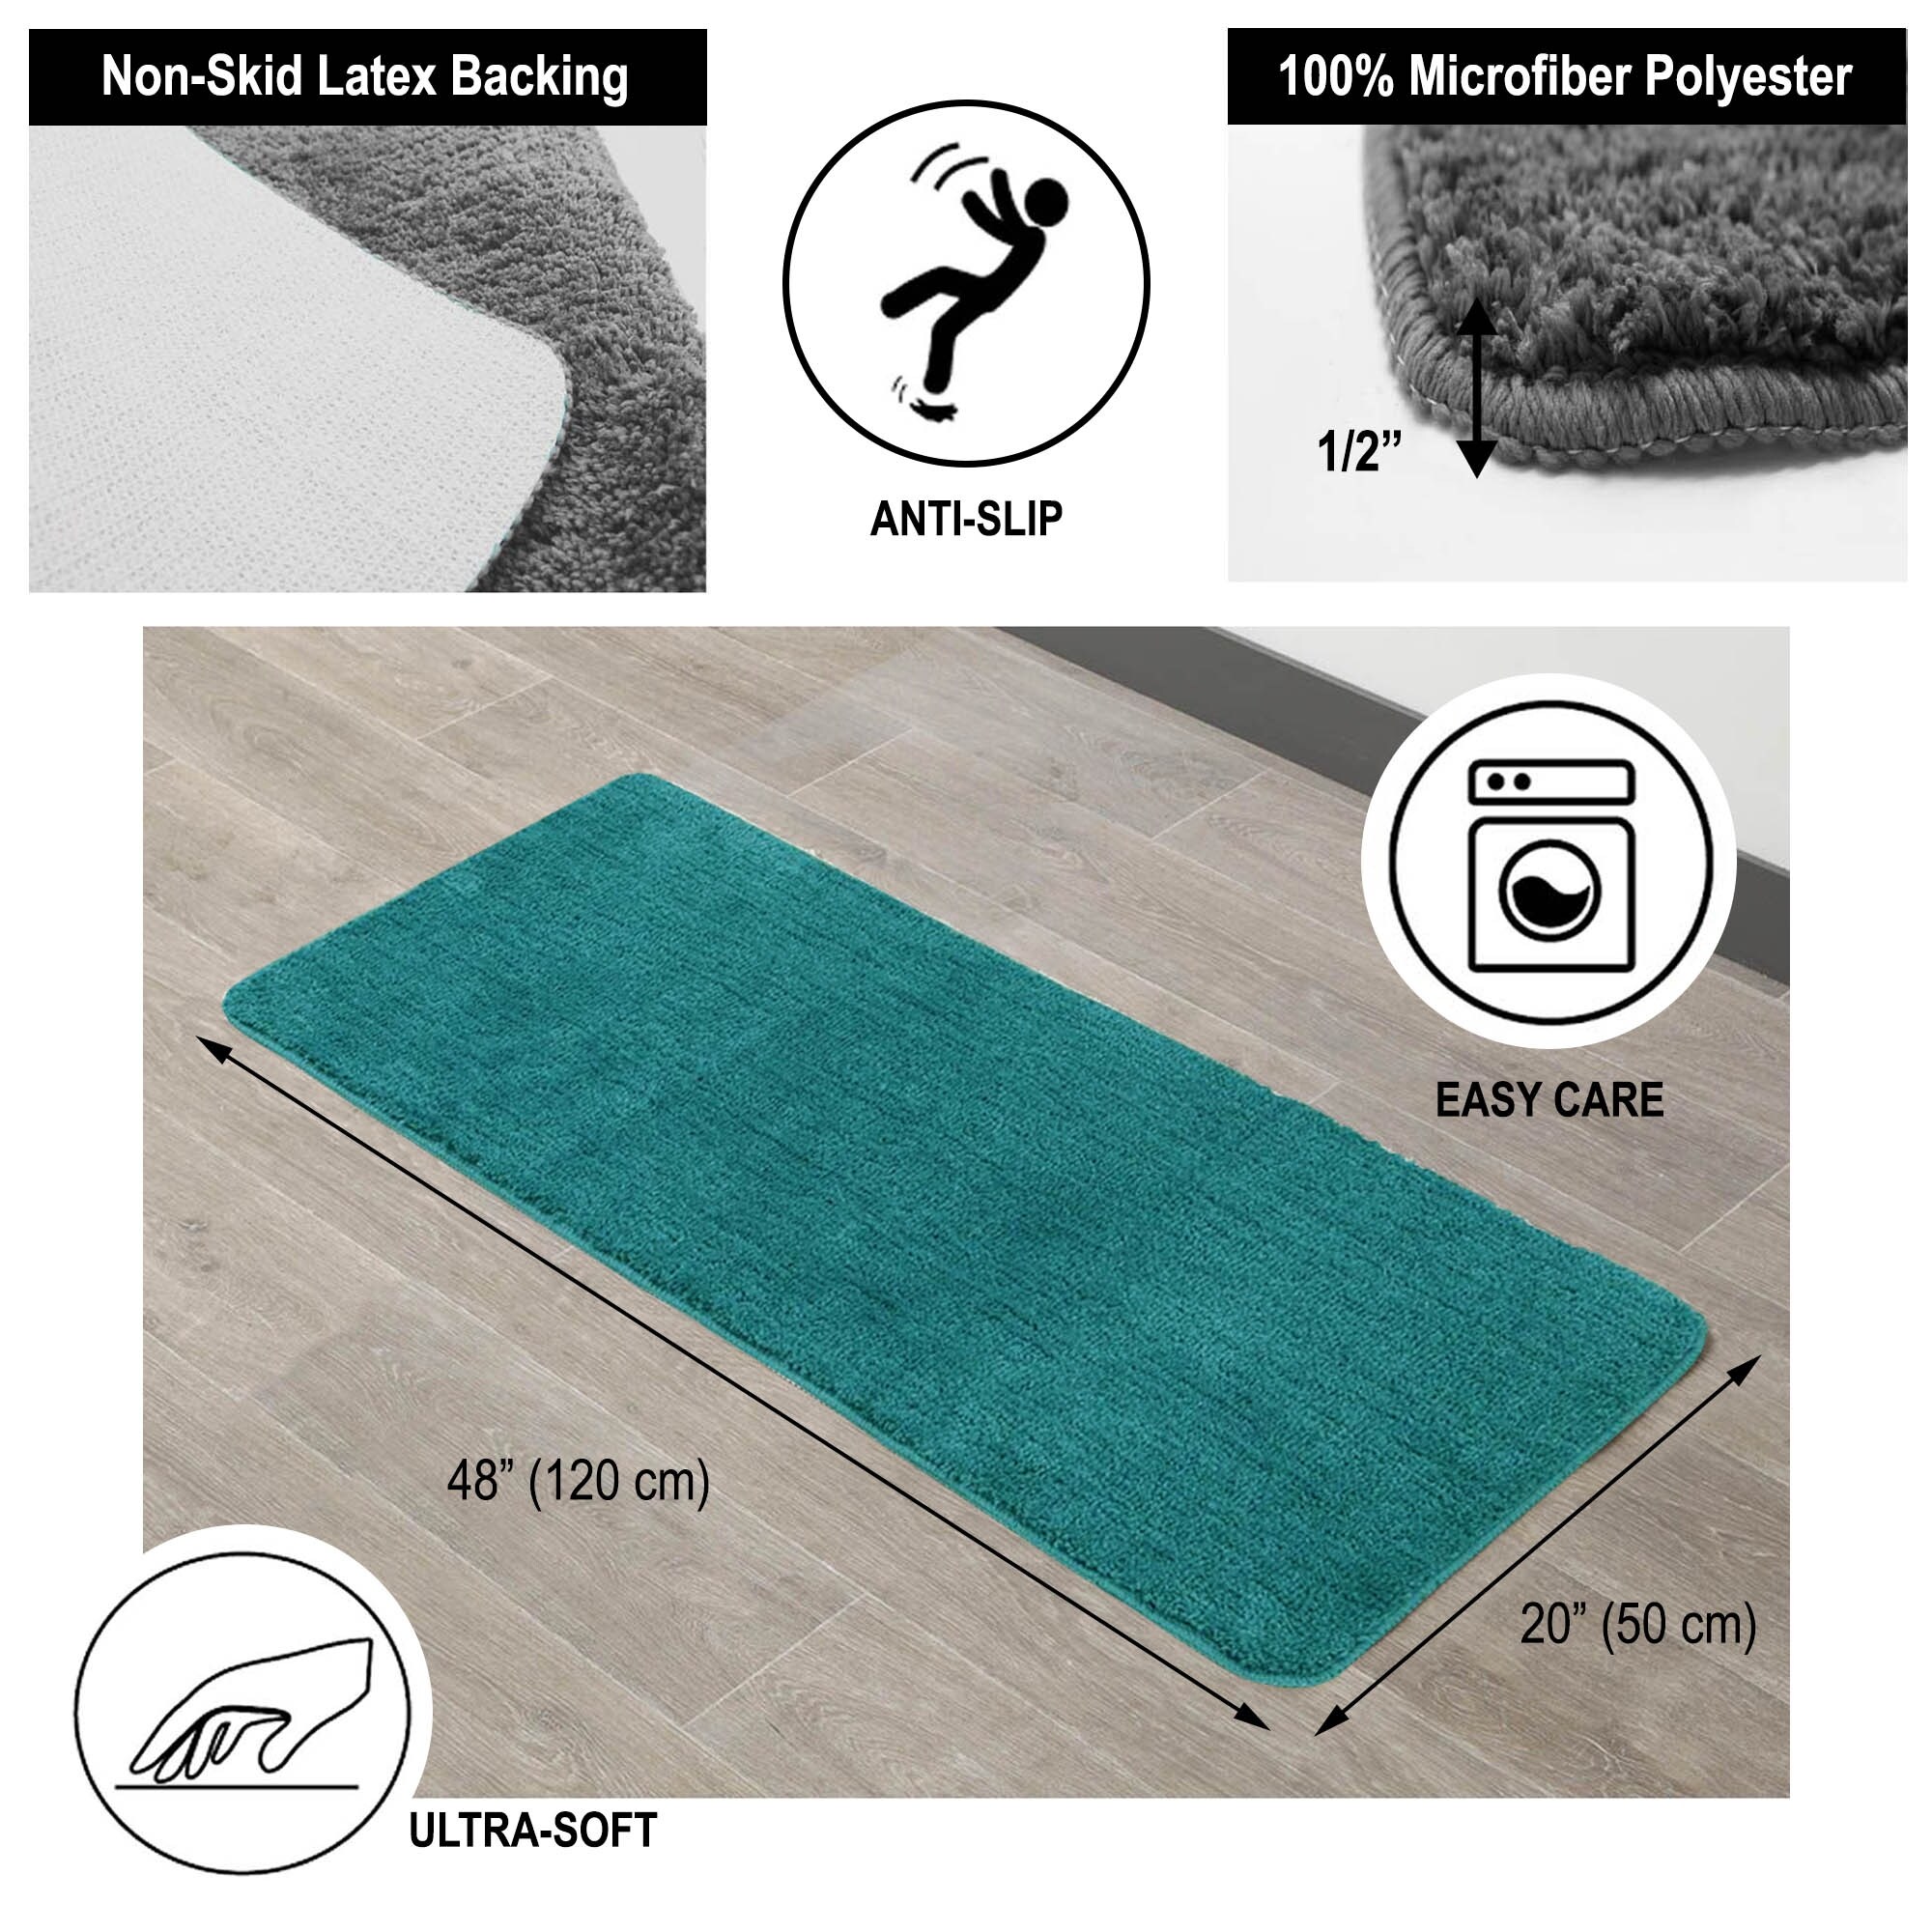 https://ak1.ostkcdn.com/images/products/is/images/direct/61a840f3df4bab42f56192f5ded754bb14bf15df/Microfiber-Polyester-Double-Sink-Bath-Mat-Runner---48%22L-x-20%22W.jpg